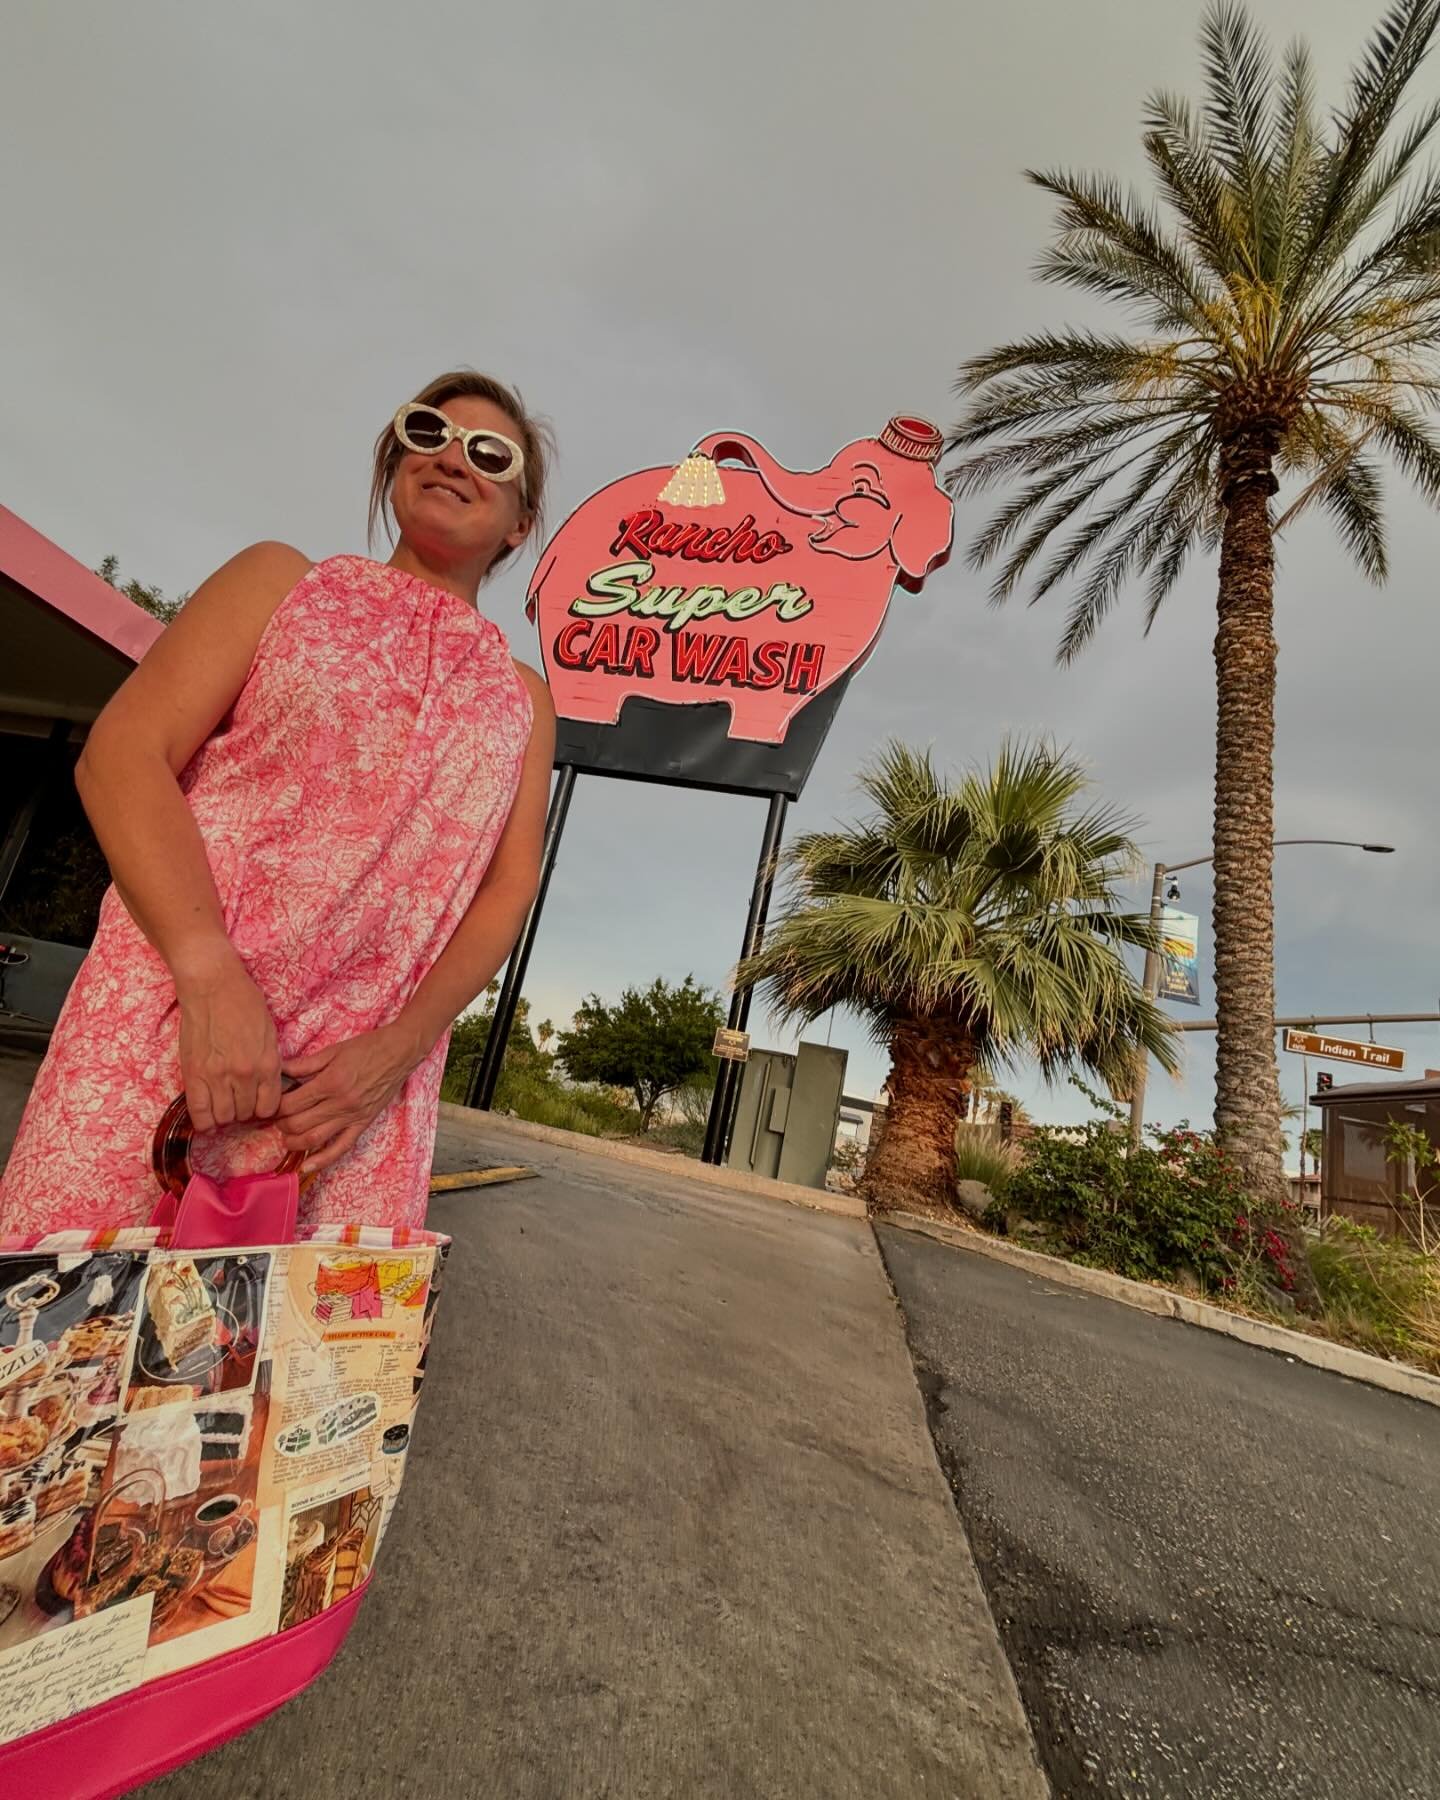 Greg and I had a little pink fun Saturday night in Palm Springs&hellip;at the car wash. 

The La Palma Dress (made with vintage polyester fabric) and the Dessert Collage Bag will be available at www.chellesummer.com I still have to finish unpacking t